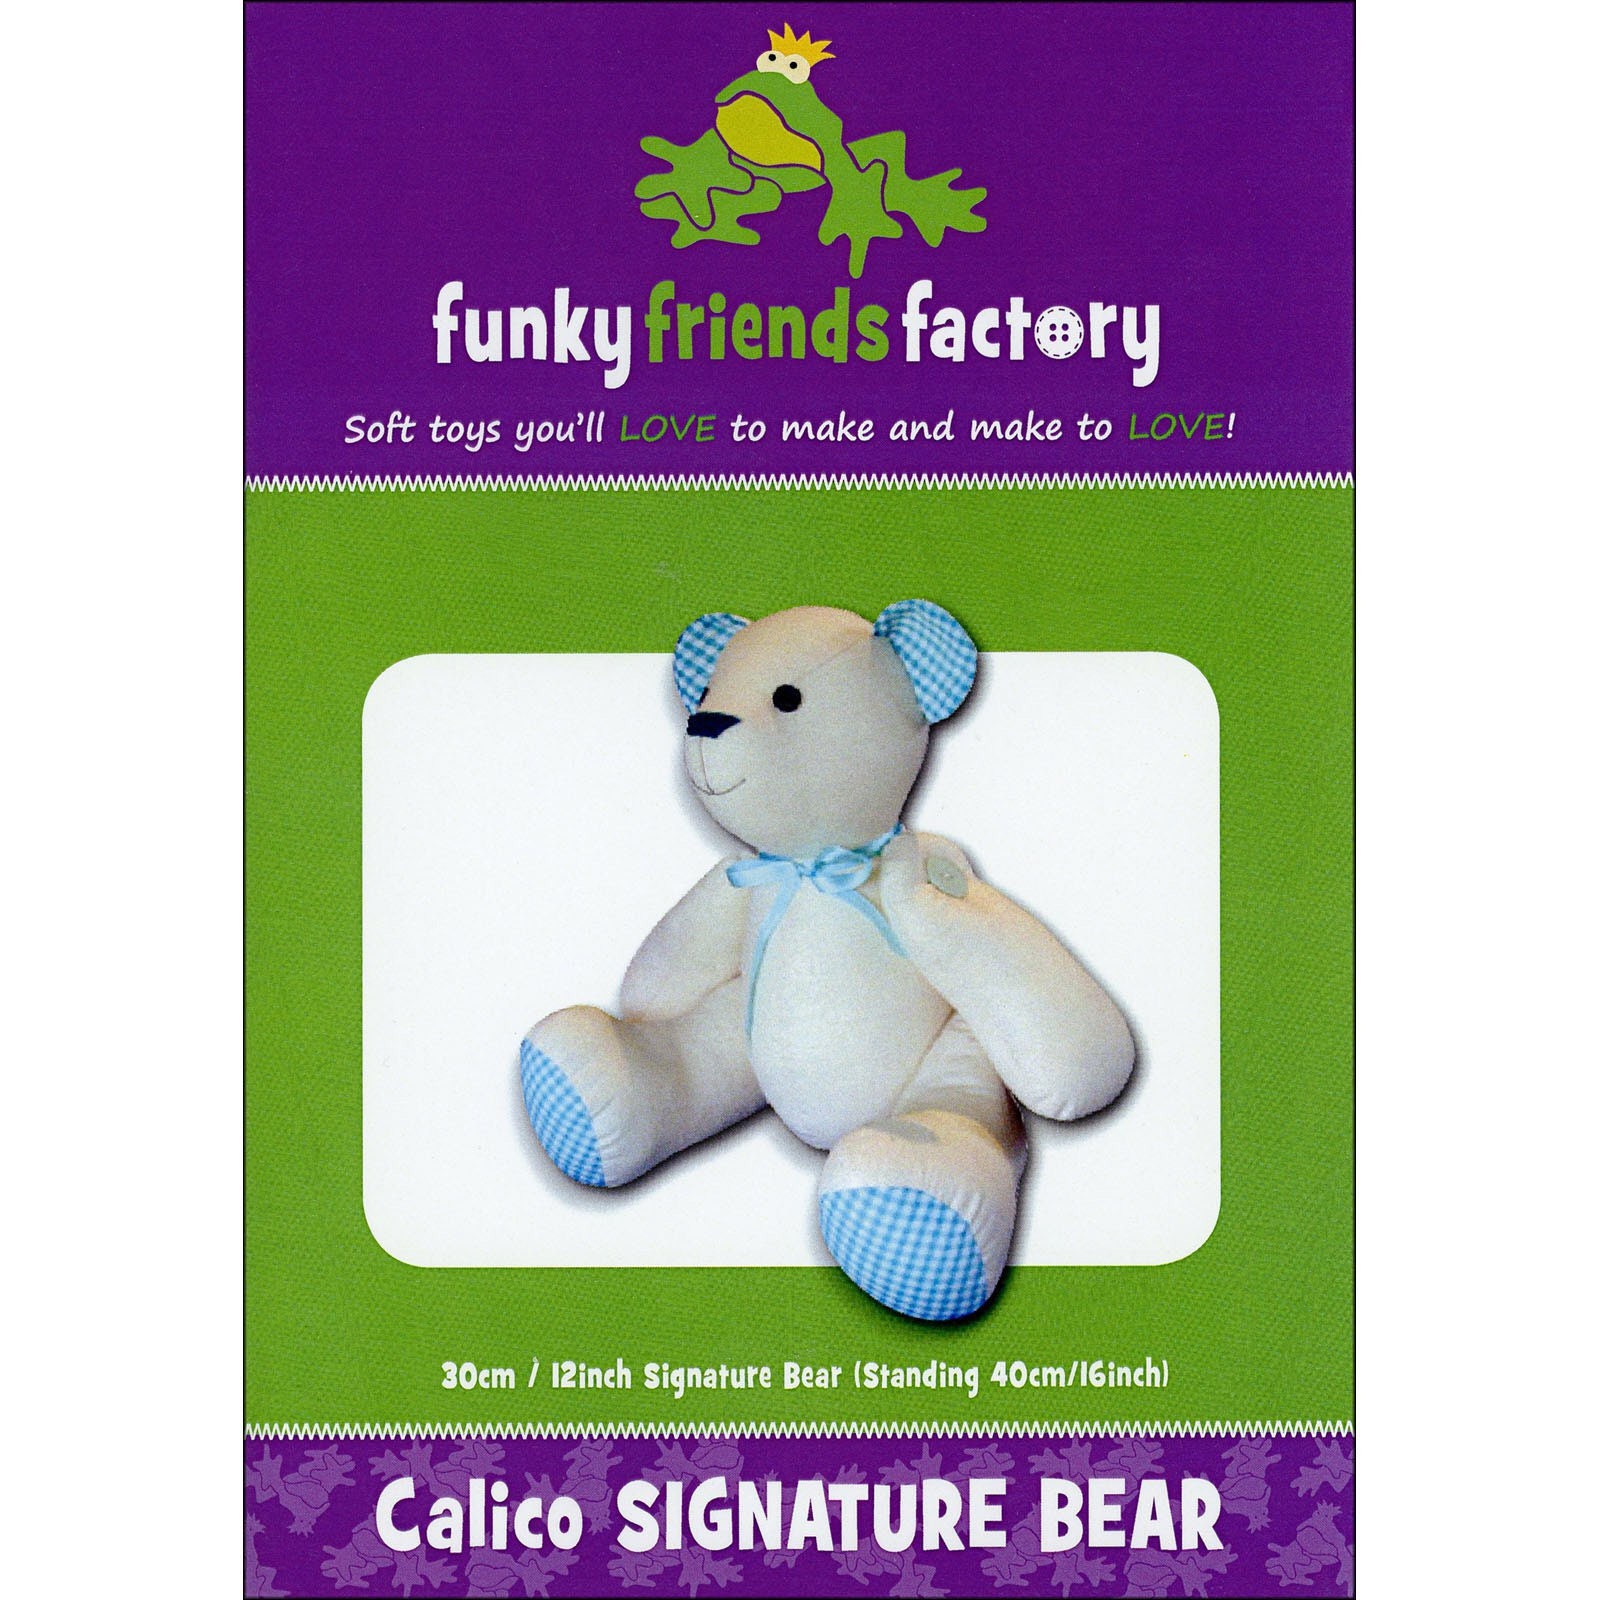 CALICO SIGNATURE BEAR Stuffed Animal Toy Sewing Pattern Funky Friends Factory Pauline McArthur Cute Adorable Squeeze Baby